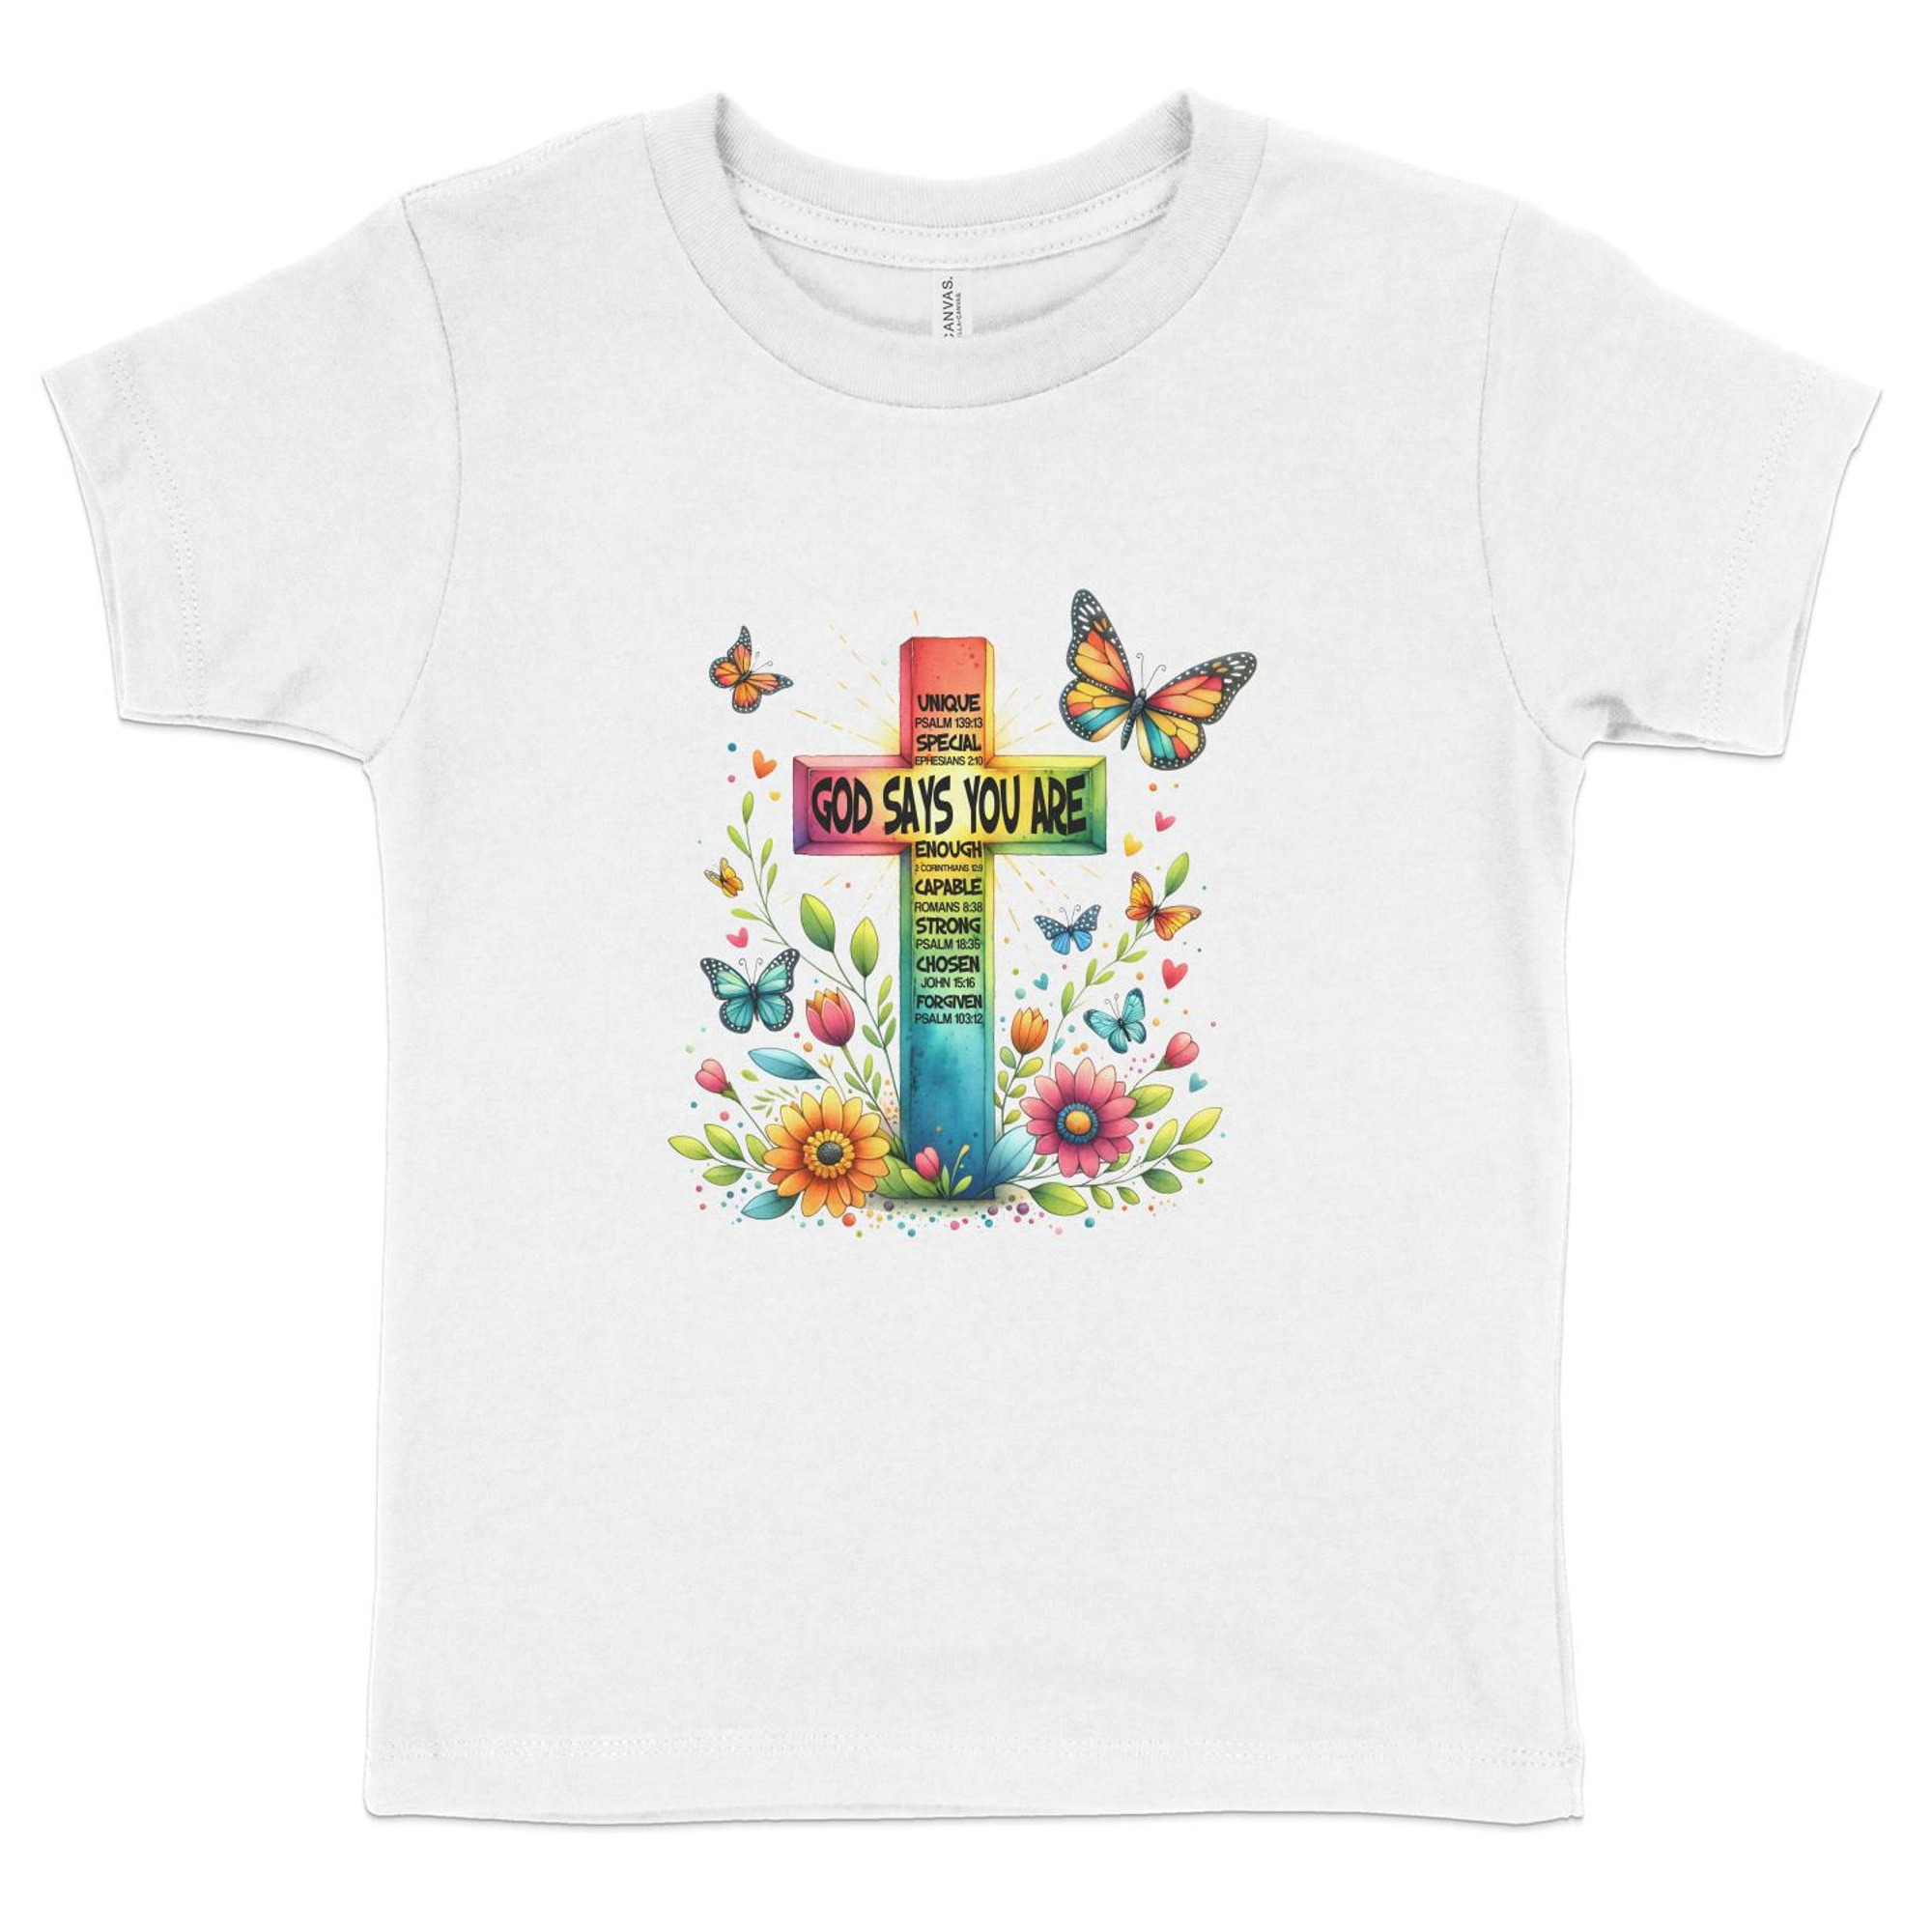 God Says You Are Toddler Short Sleeve Tee Size: 5/6T Color: White Jesus Passion Apparel